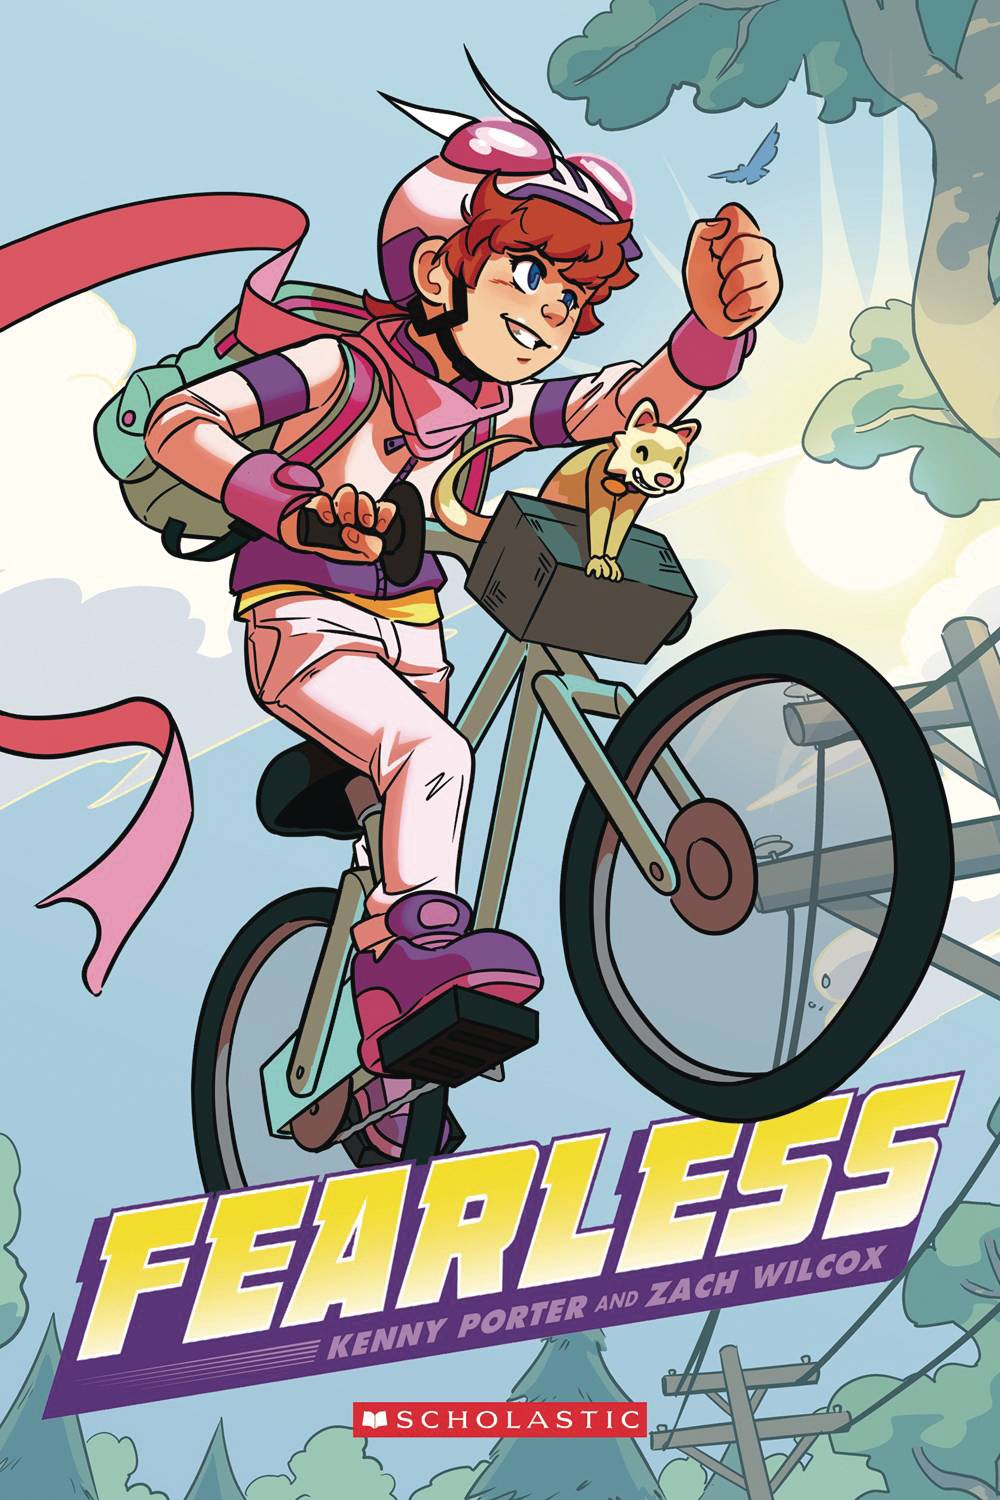 A girl with short red hair bikes into the air, one hand held forwards in a fist. She is wearing a pink helmet with bug-like decoration, a short-sleeved hoodie trailing a pink ribbon, light pink jeans, purple shoes, and a mint green backpack. In the front basket of her bike, there is a grinning beige and brown ferret. In the background, there are trees and telephone poles and a bright sunny sky.